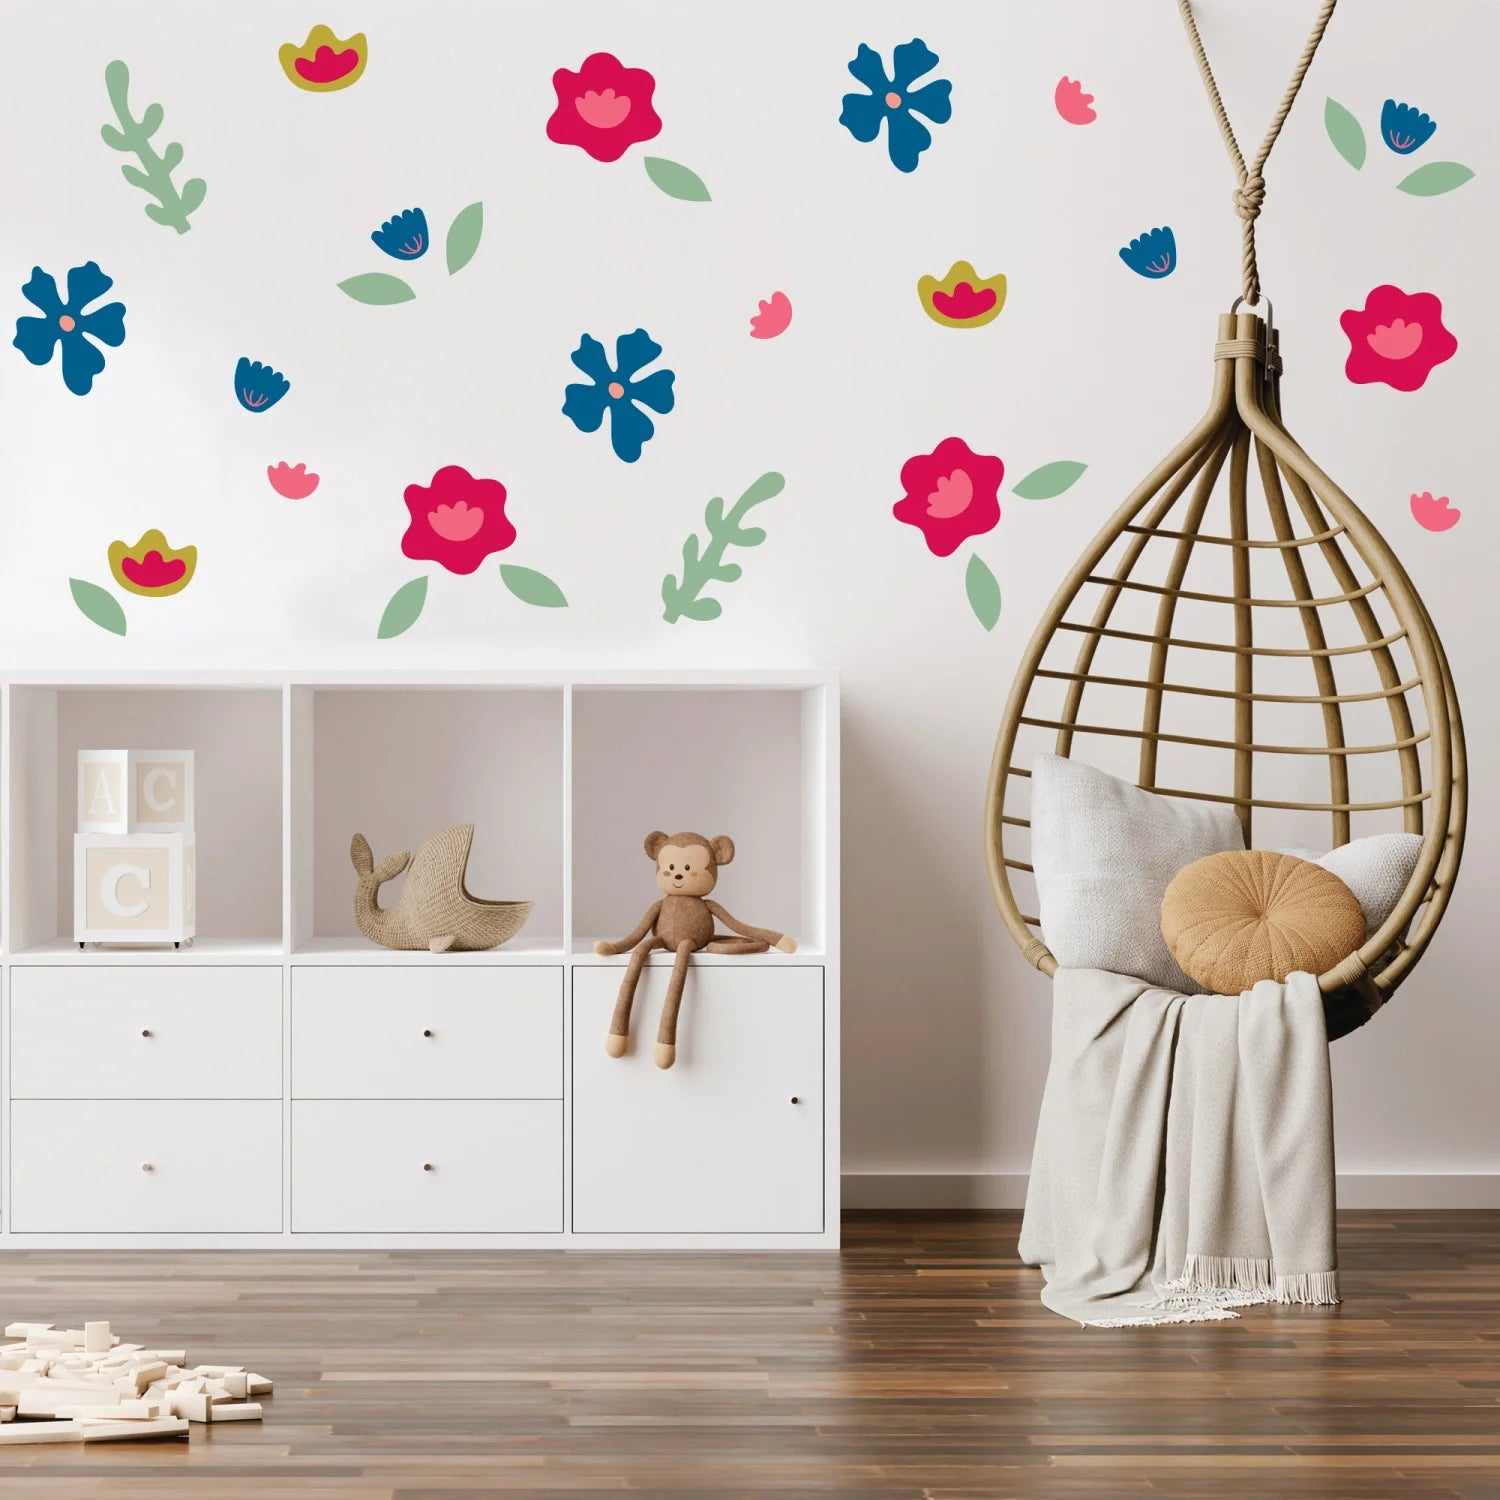 Bold Florals Wall Decal - Decals Nature